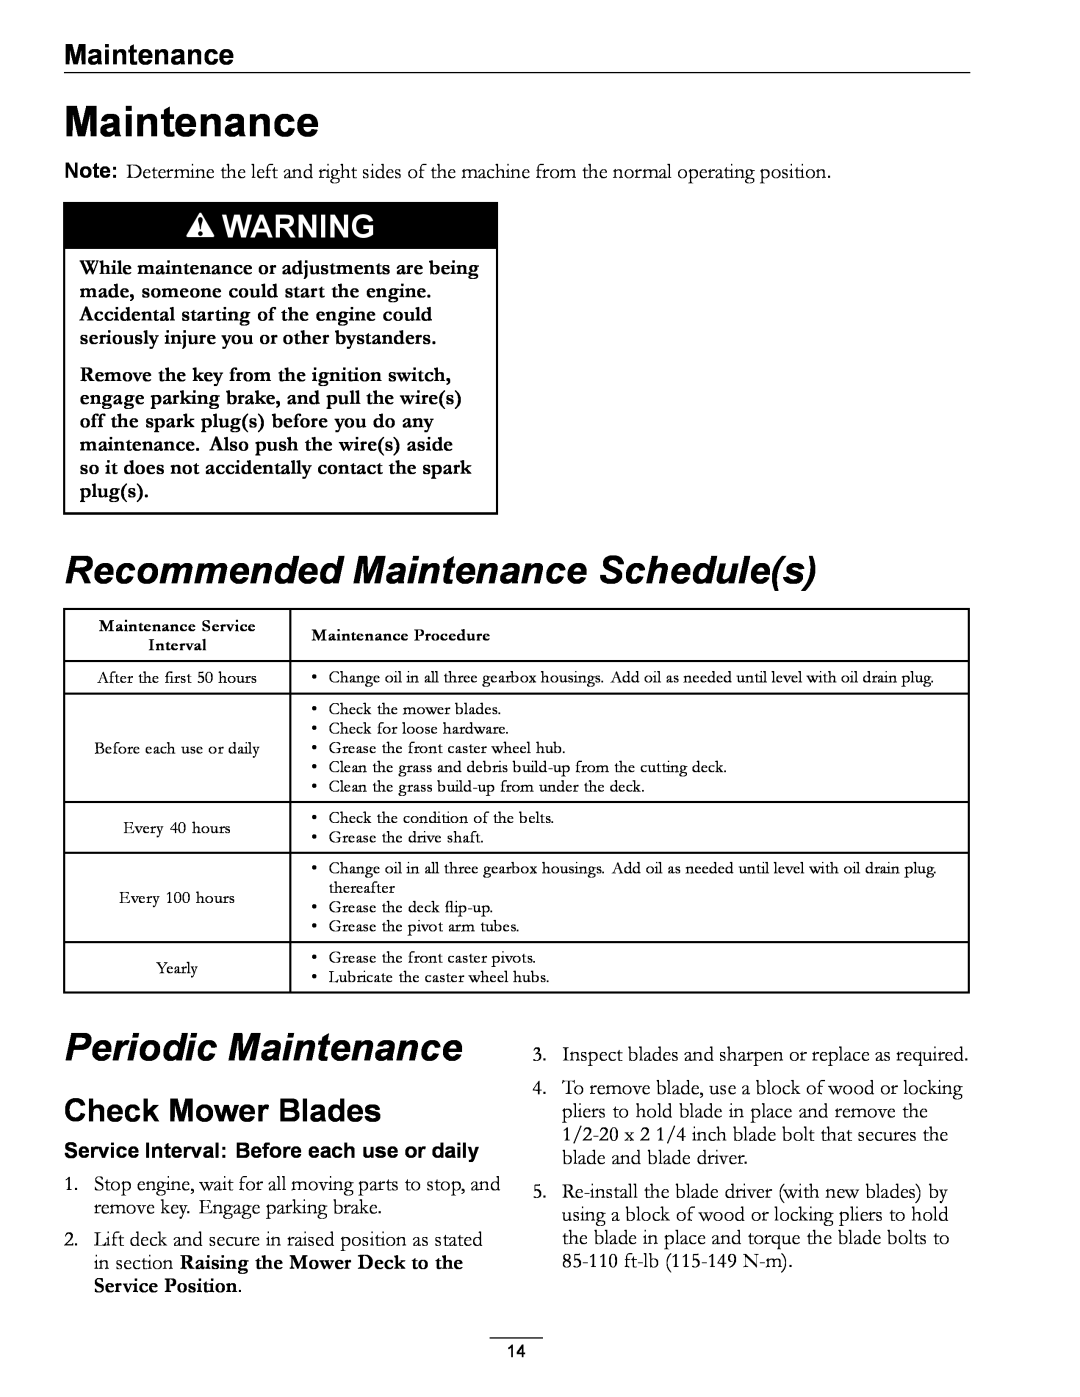 Exmark 4500-370 manual Recommended Maintenance Schedules, Periodic Maintenance, Check Mower Blades 